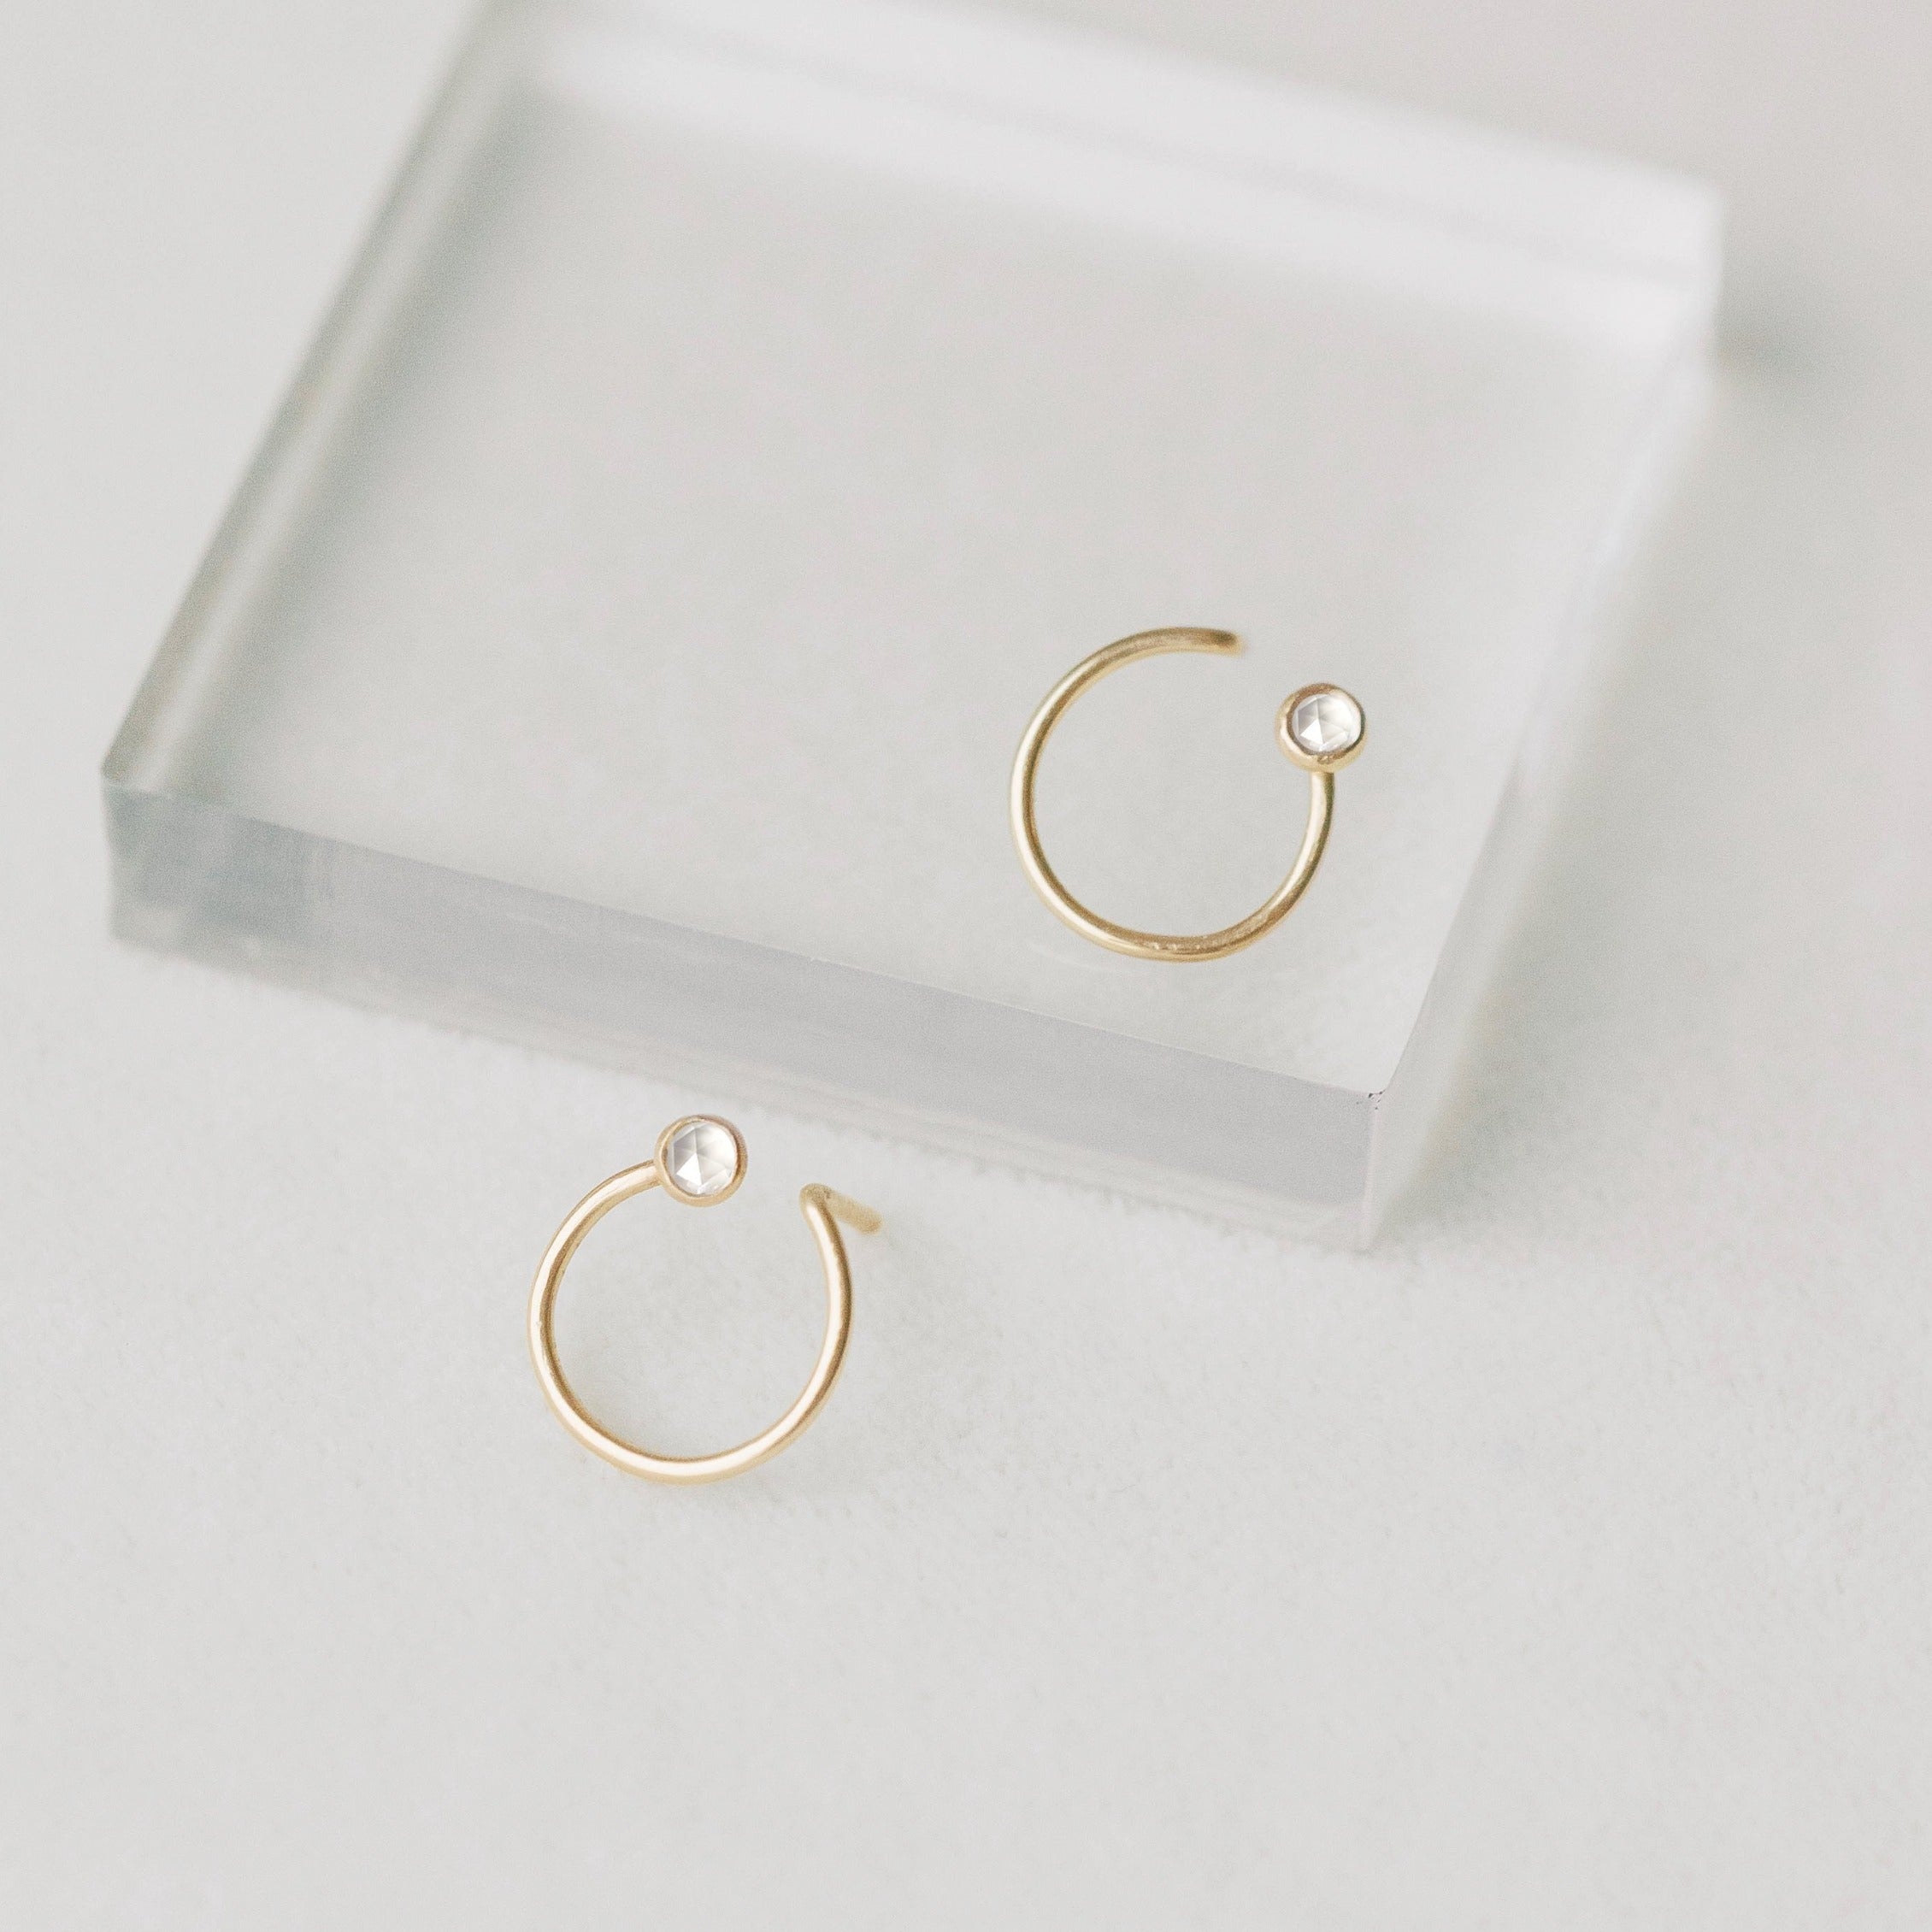 Tiny gold circle earrings made with recycled gold